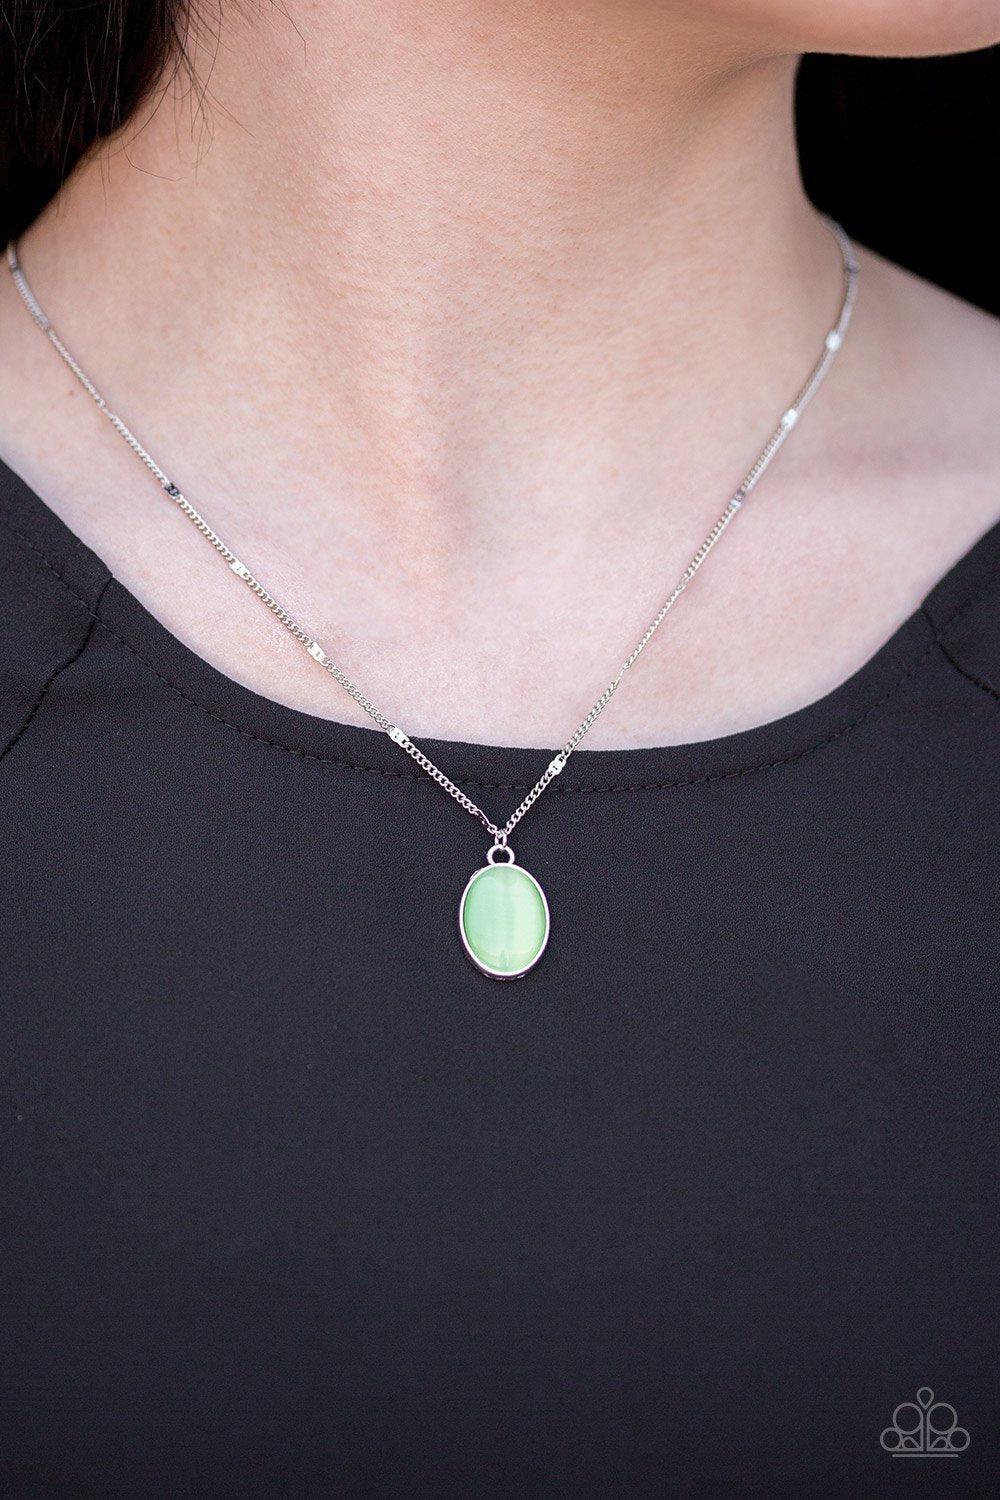 Summer Cool Green Moonstone Necklace and matching Earrings - Paparazzi Accessories-CarasShop.com - $5 Jewelry by Cara Jewels